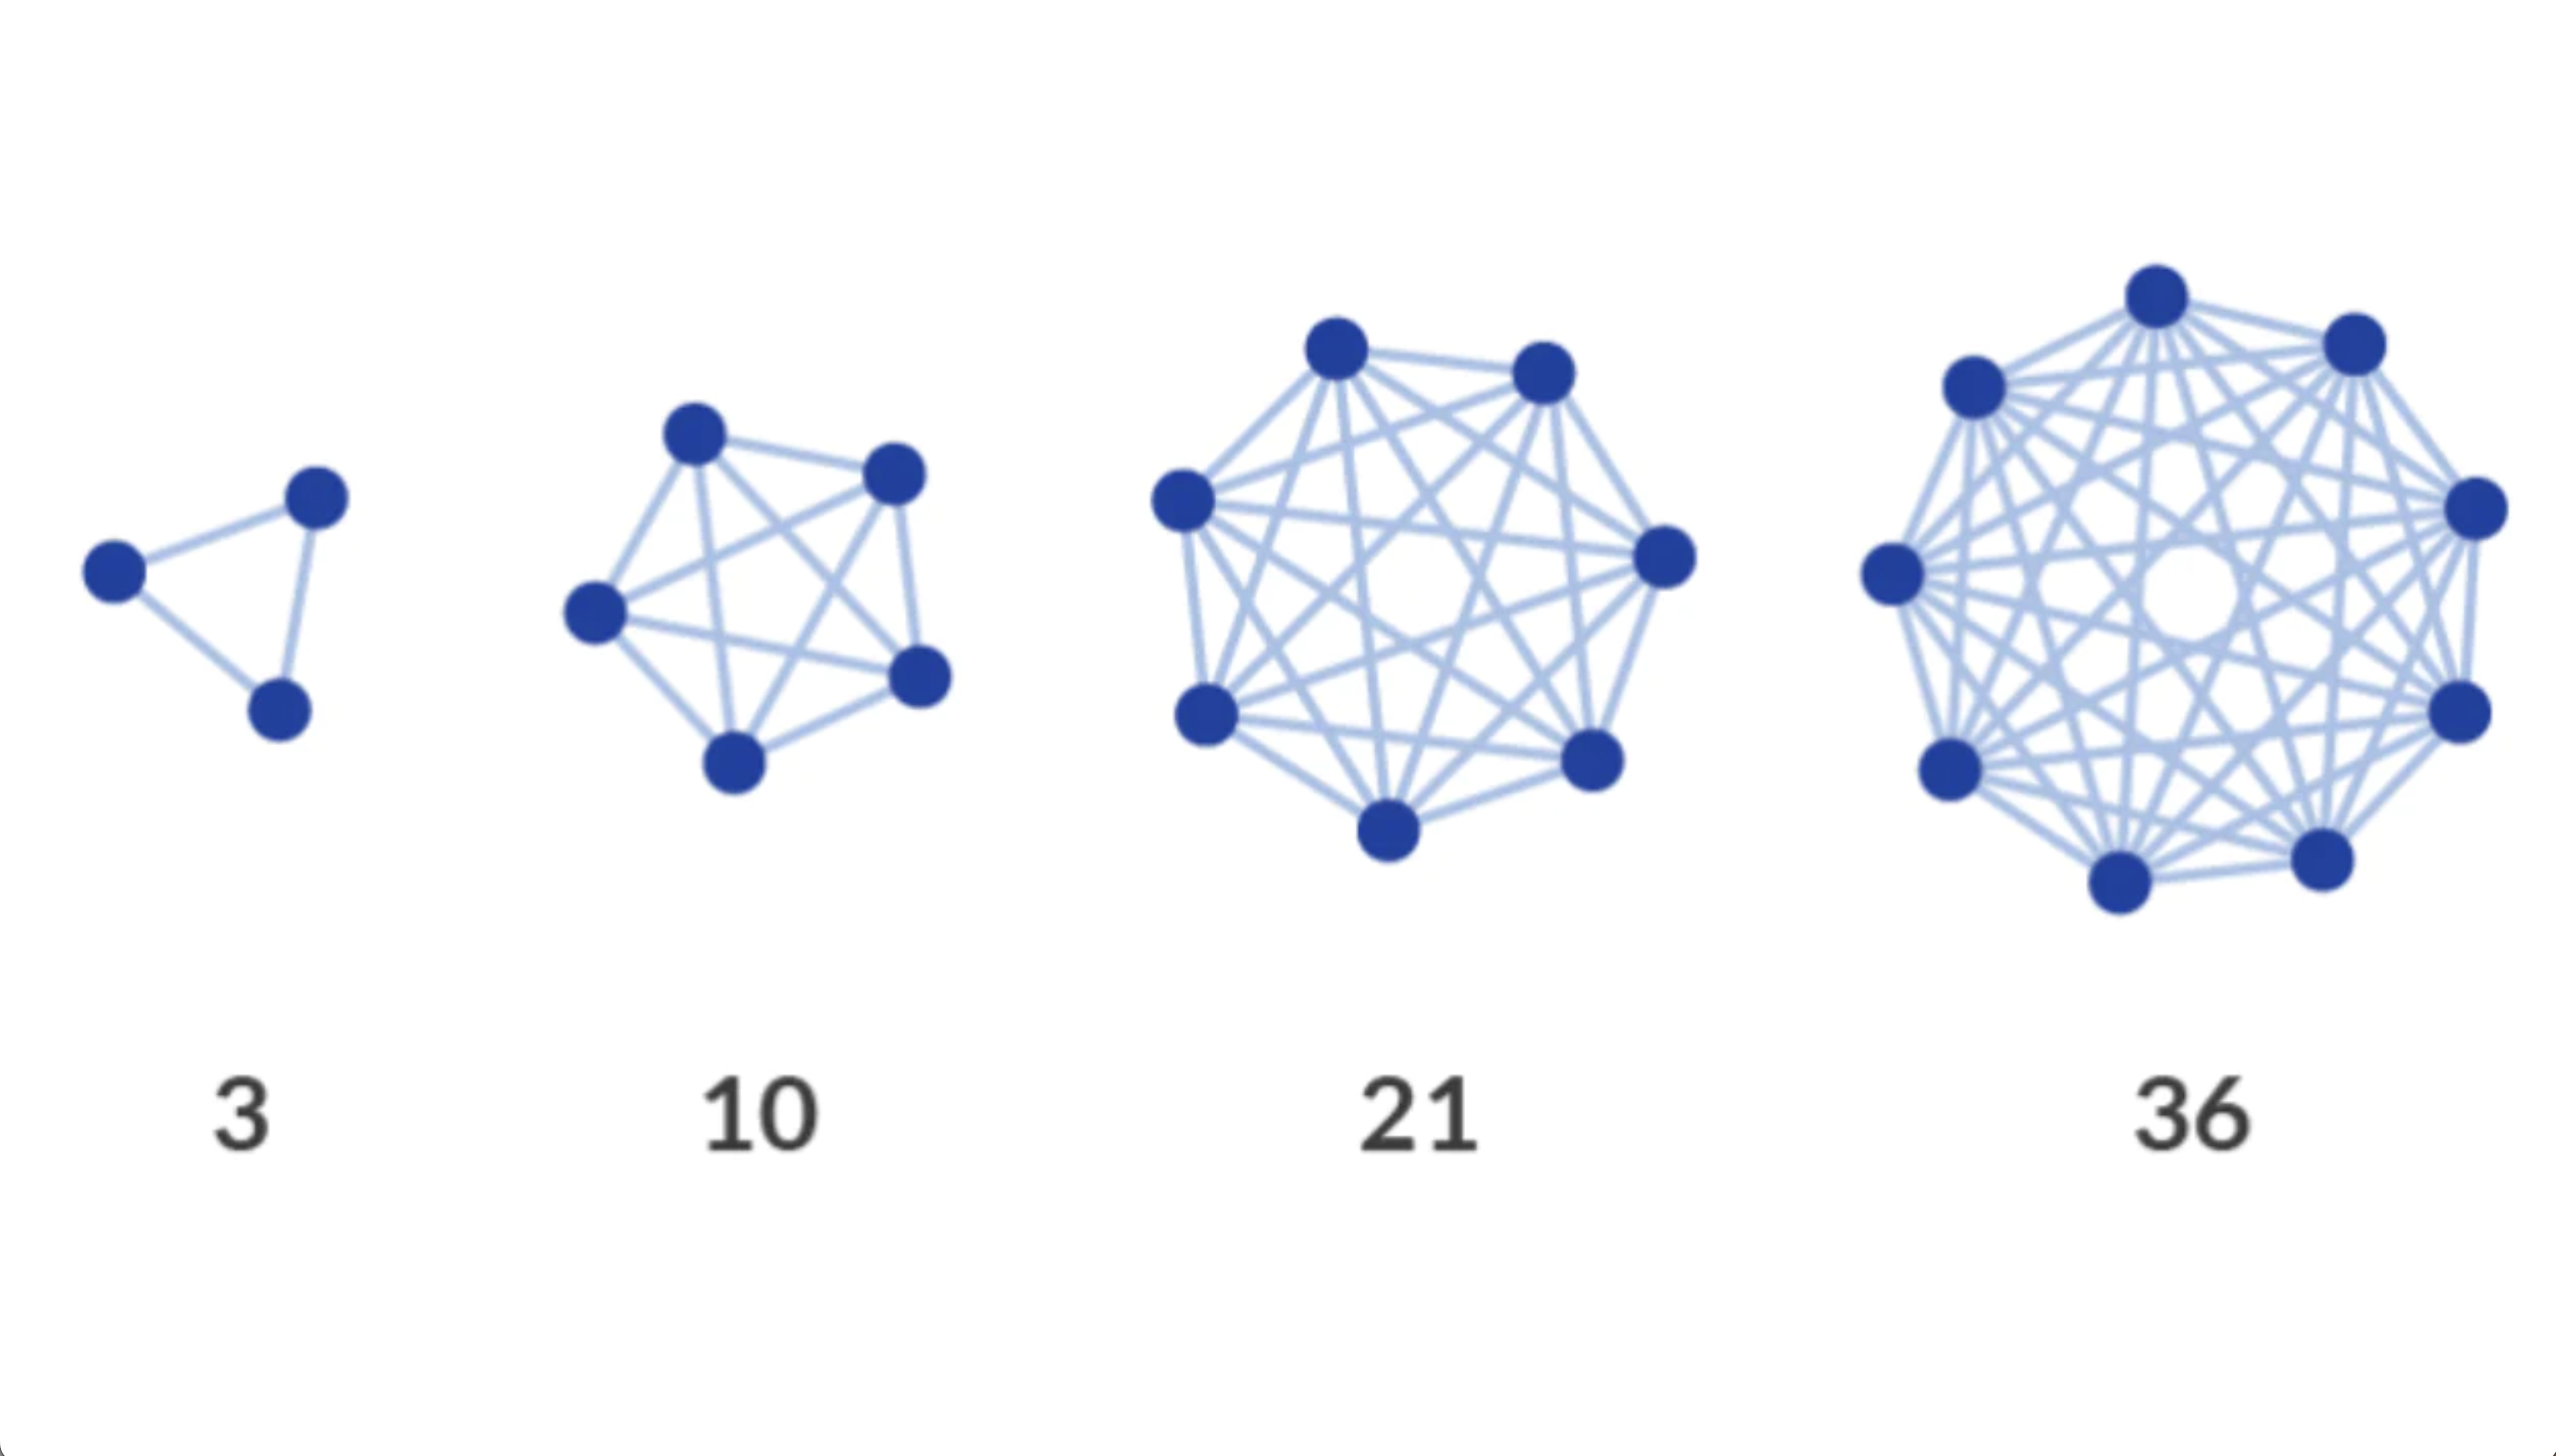 more than 5 people (10 connections) is complicated. more than 9 people (36 connections) gets out of hand quickly.